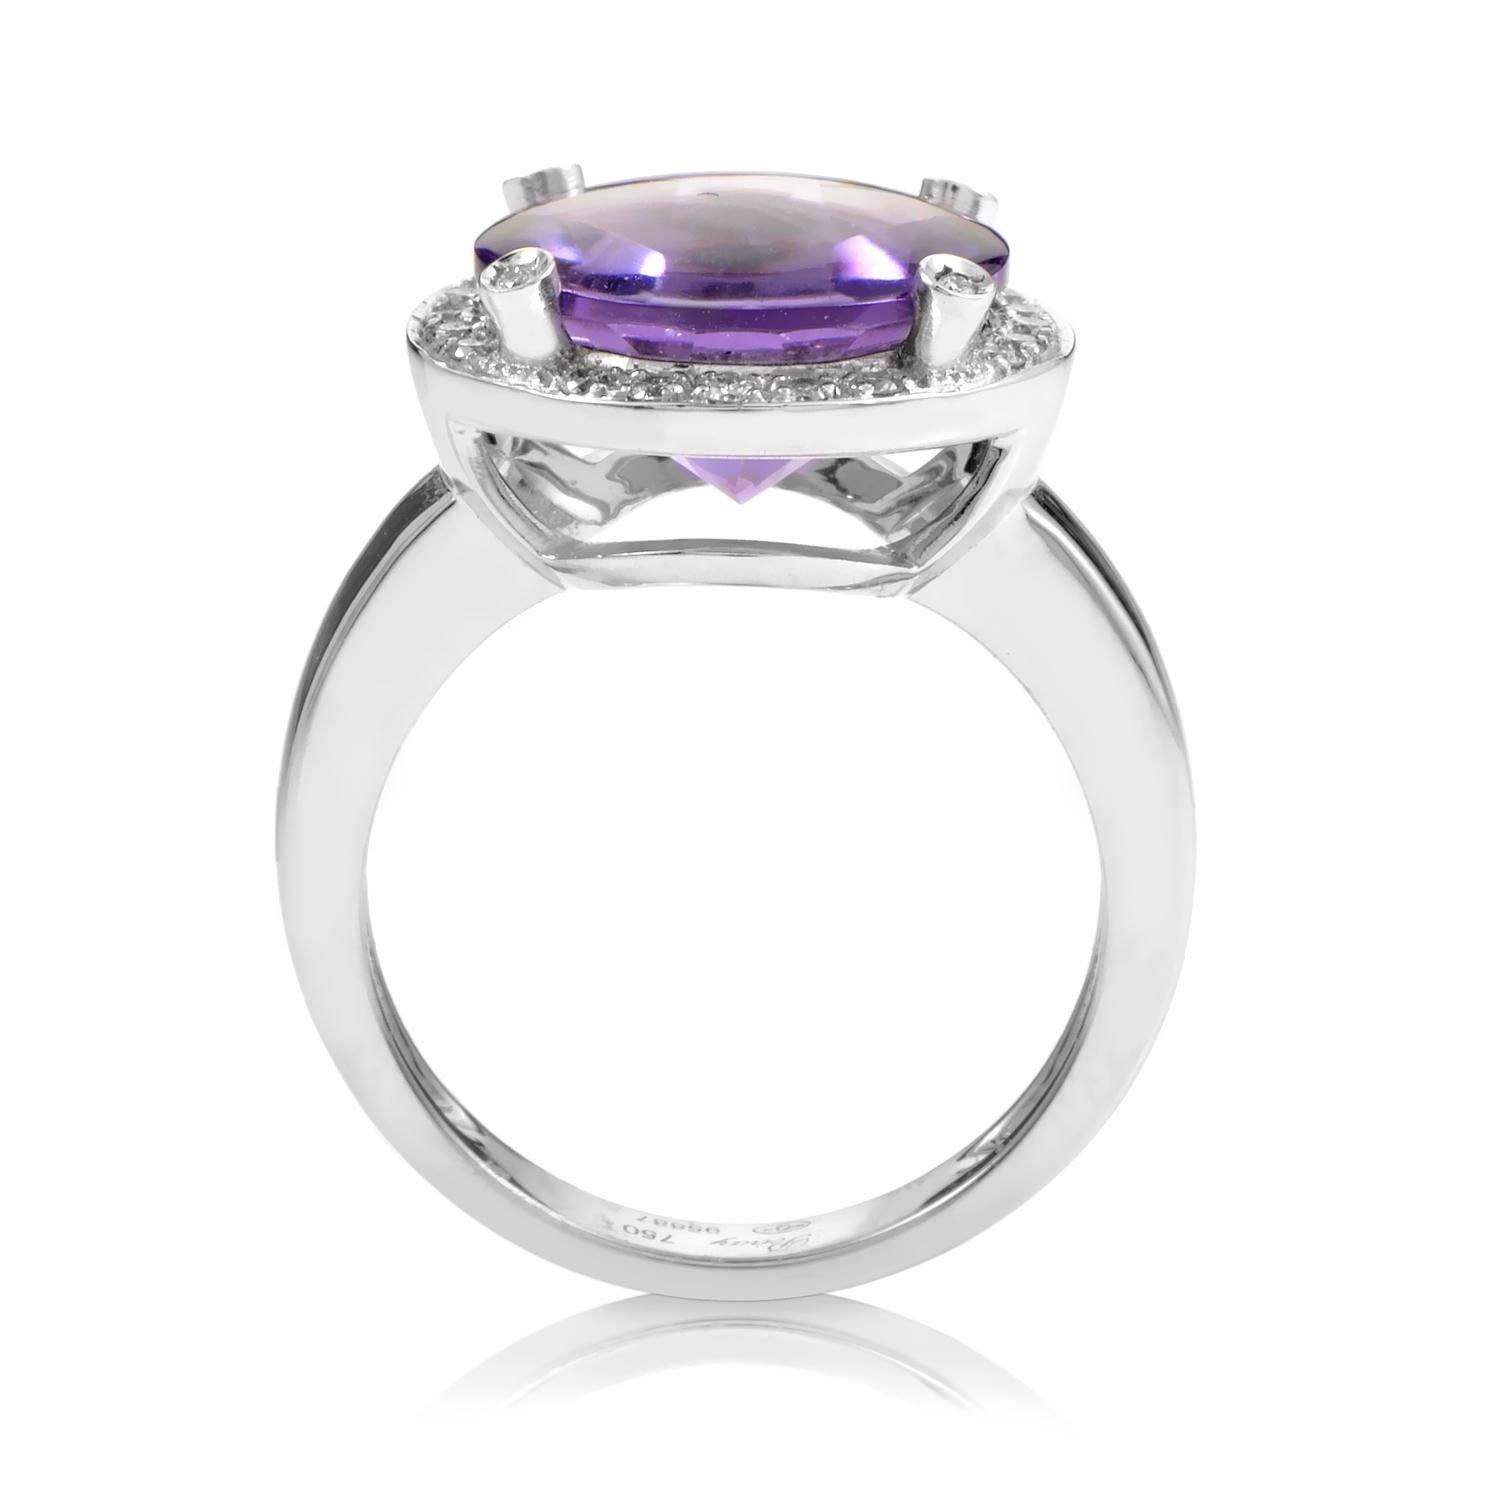 The regal elegance of this Poiray ring is mesmerizing. The ring is made of 18K white gold with a round cut faceted amethyst totaling ~5ct that is beautifully held by four diamond set prongs which rise from a halo of pave set diamonds totaling